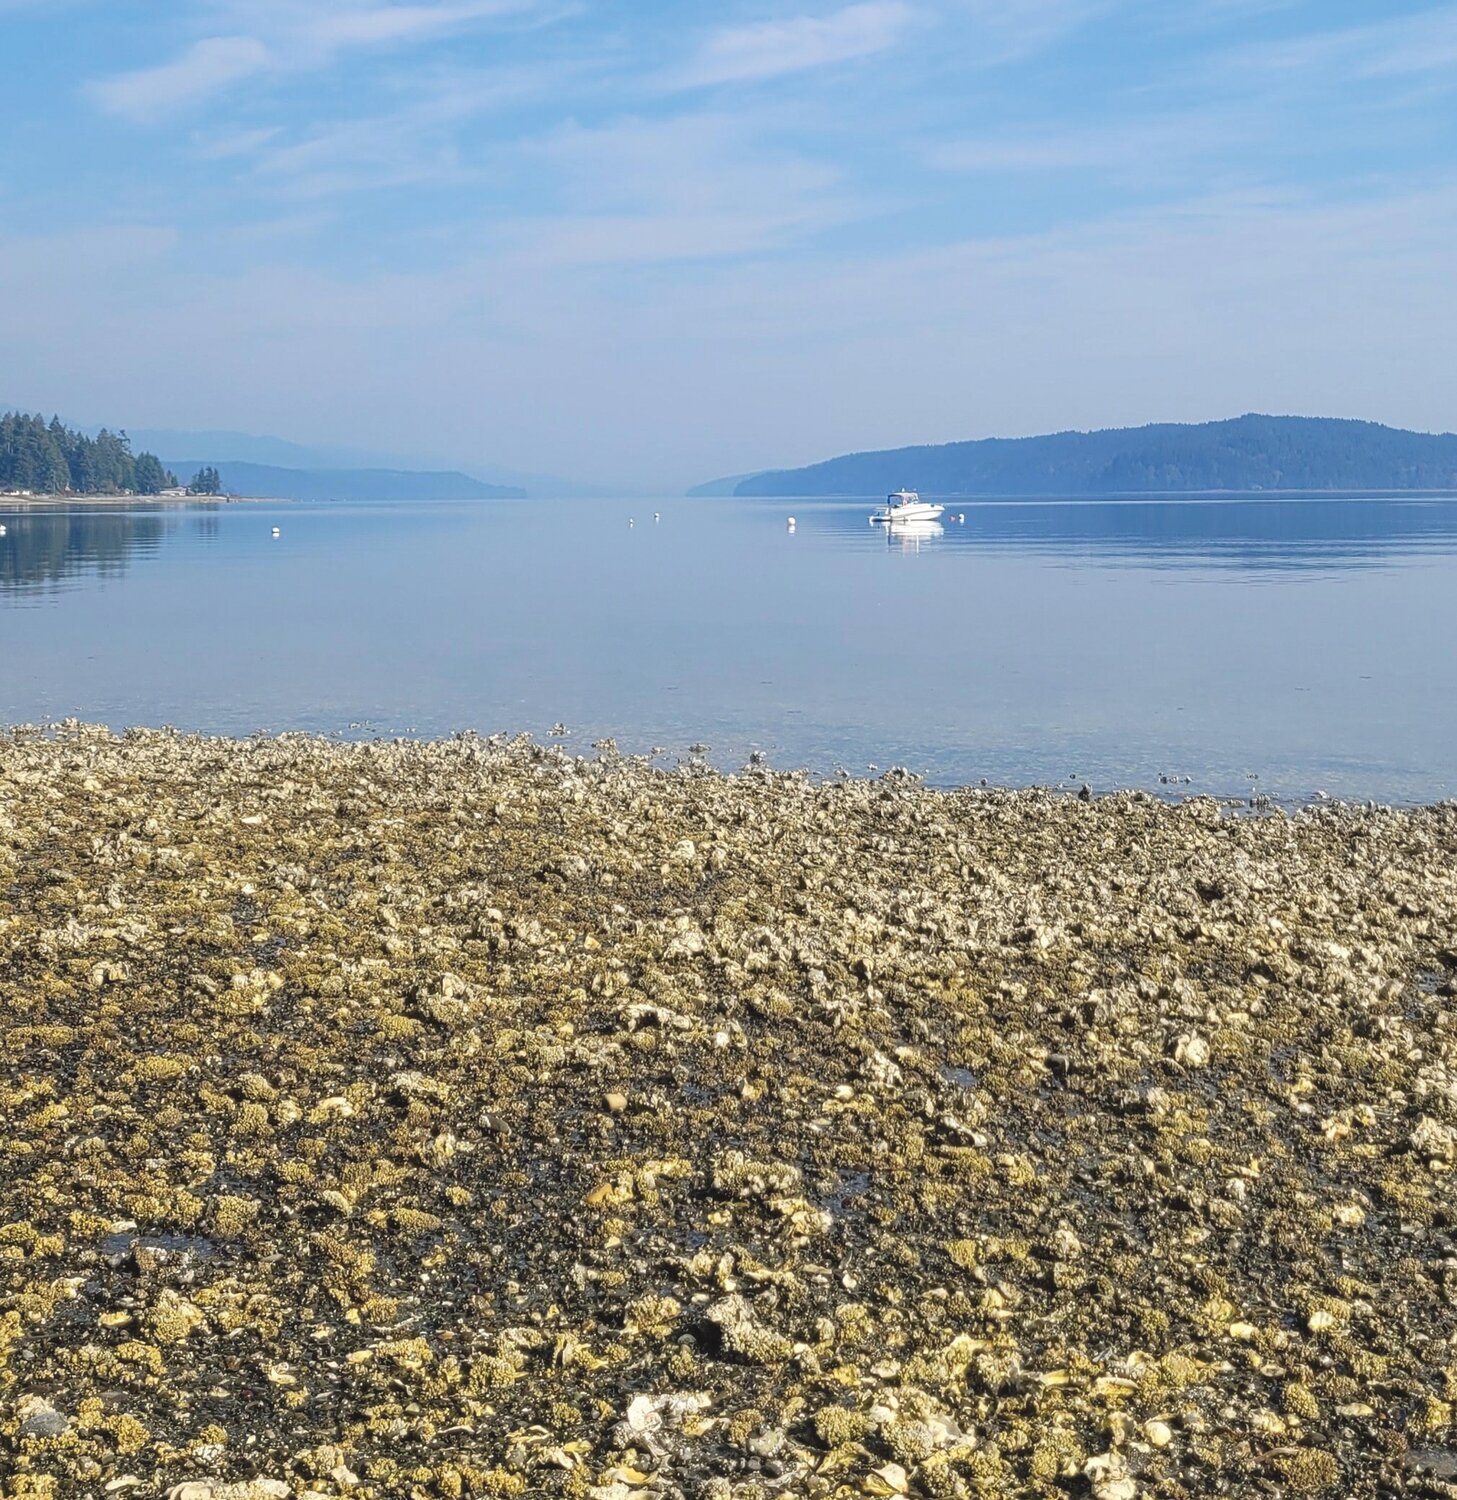 Potlach State Park and Hood Canal.
Courtesy Washington State Parks